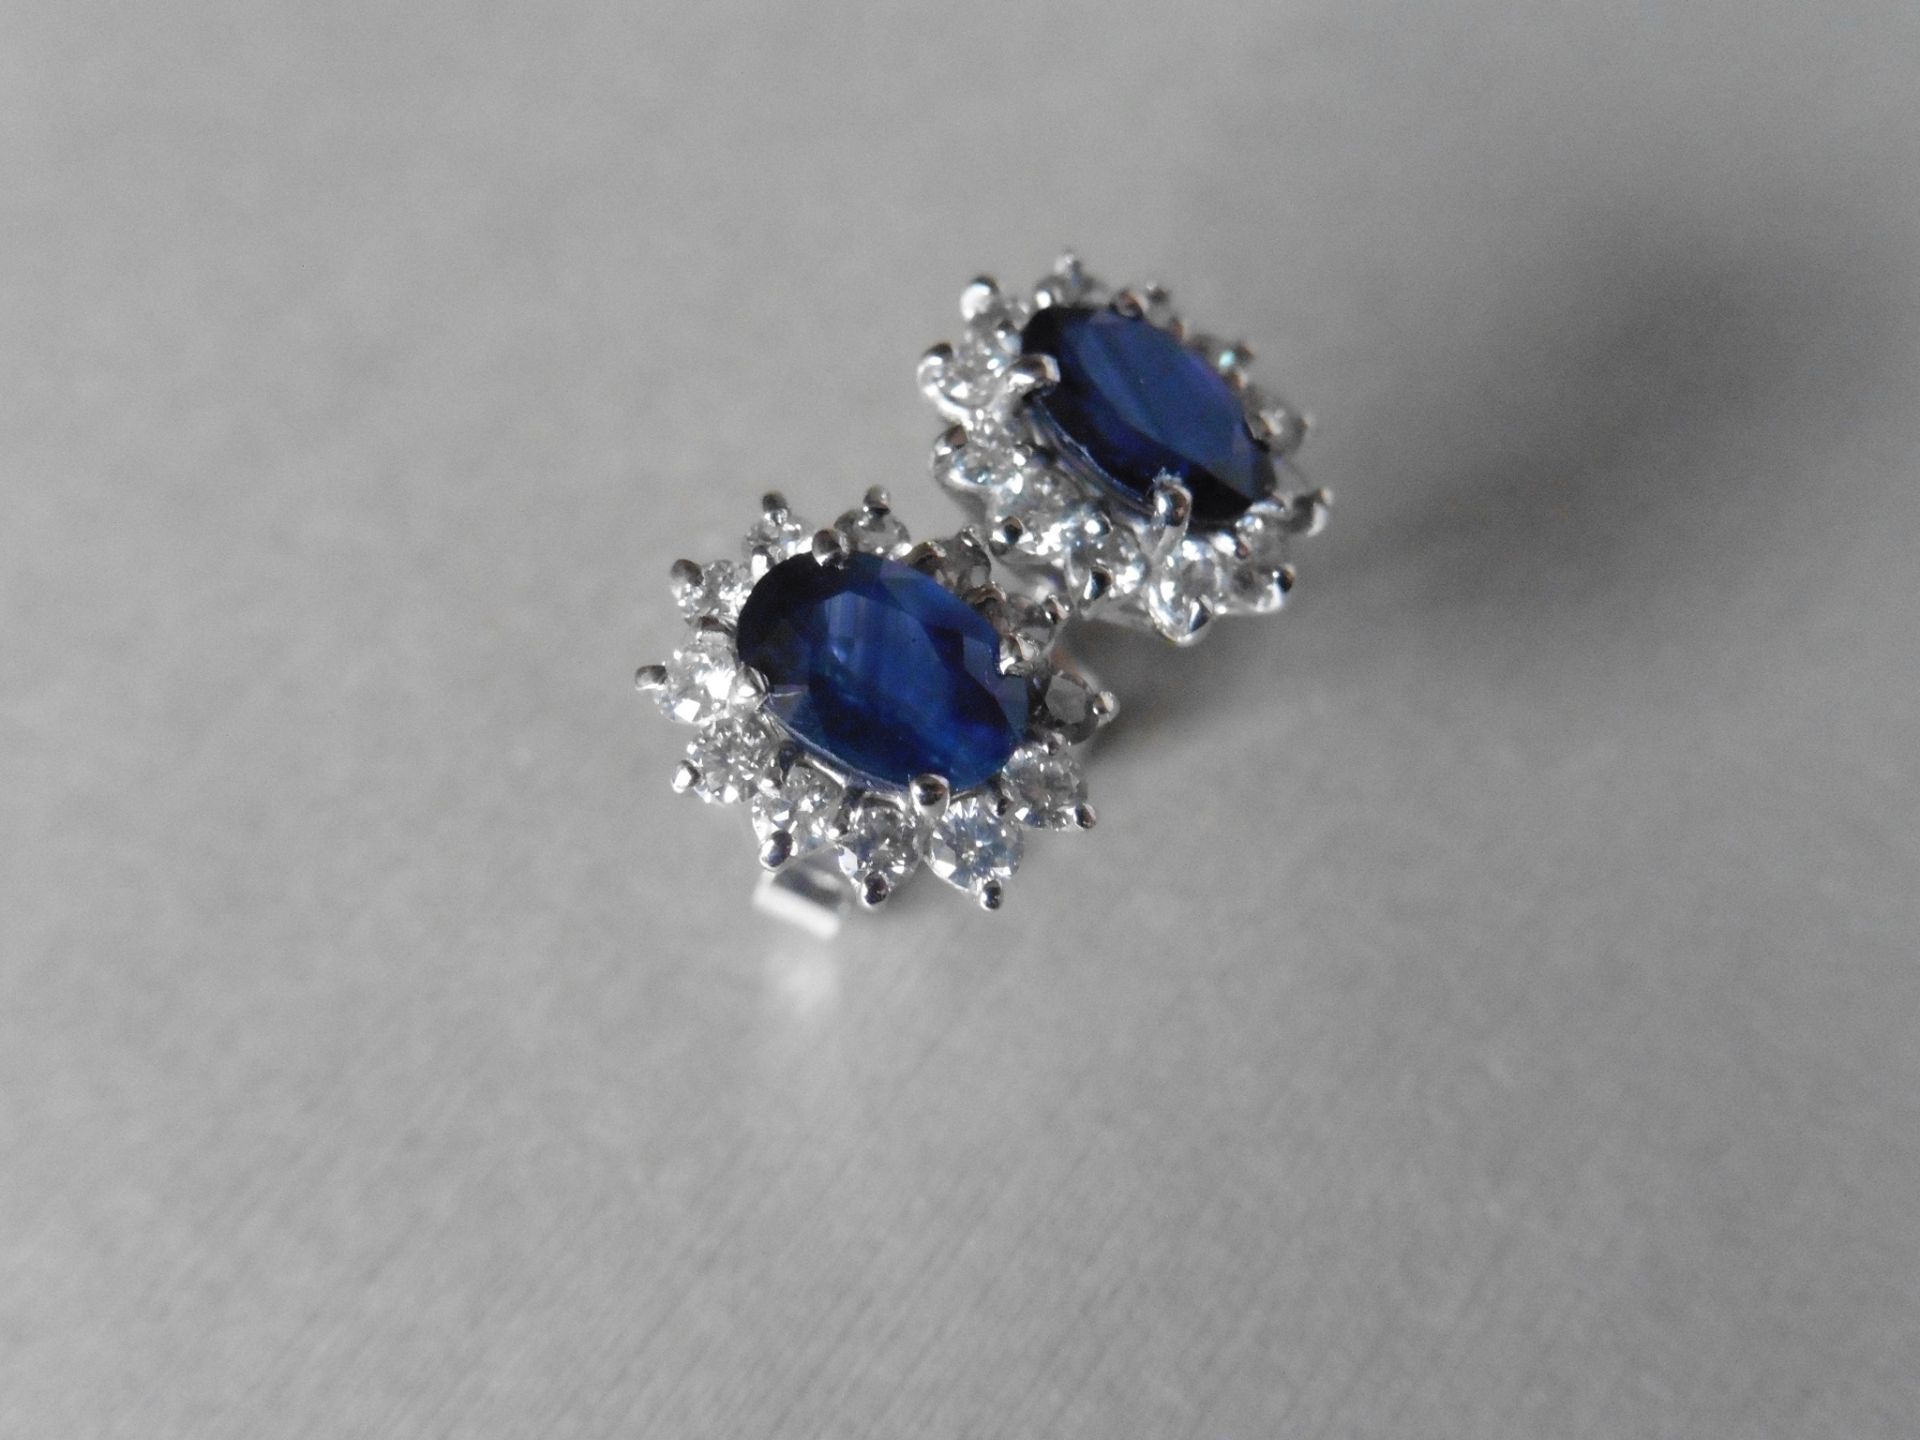 1.60ct Sapphire and Diamond cluster style stud earrings. Each Sapphire measures 7mm x 5mm and is